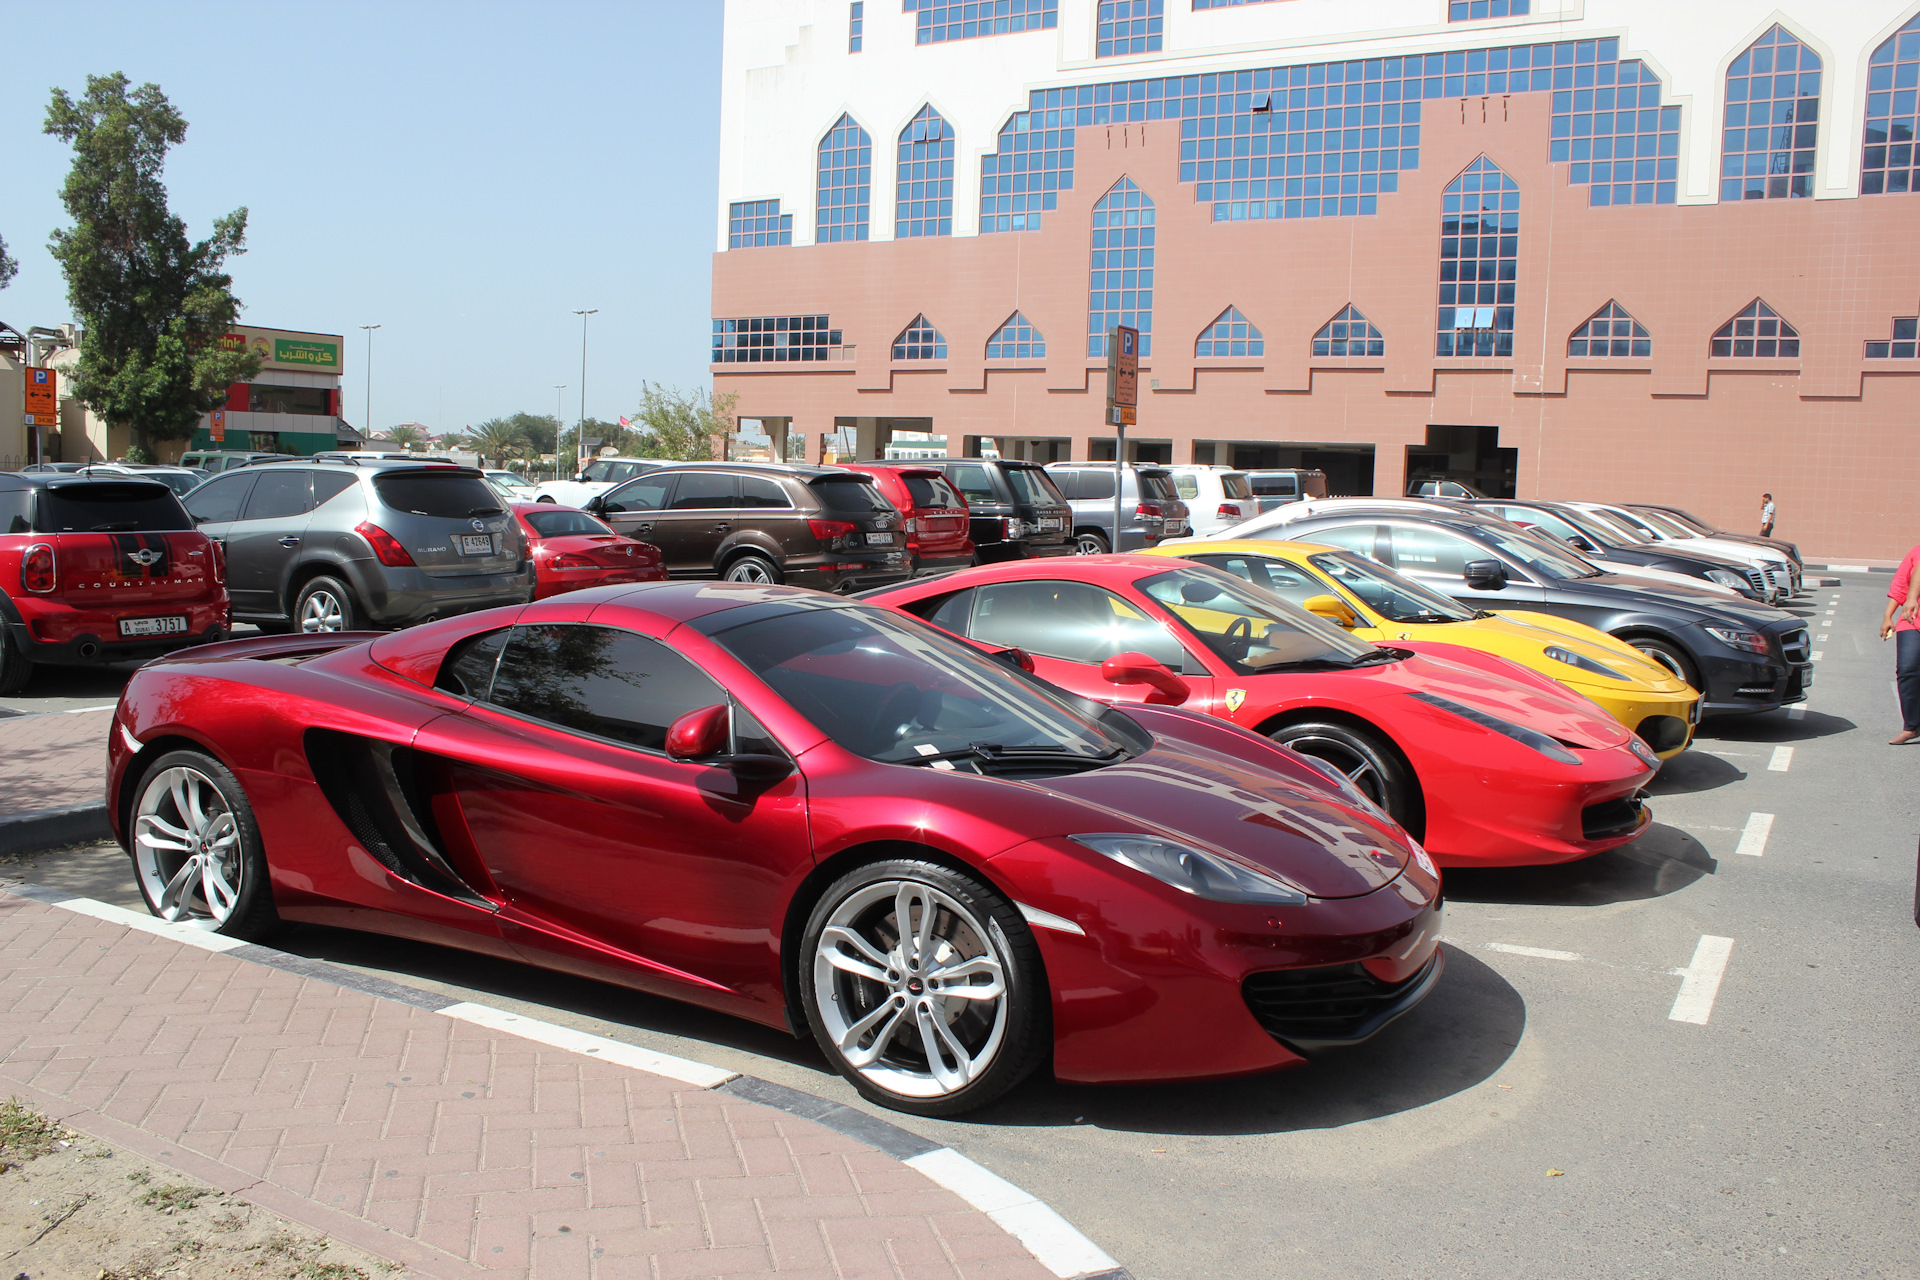 Rent a Car in Deira on a Budget